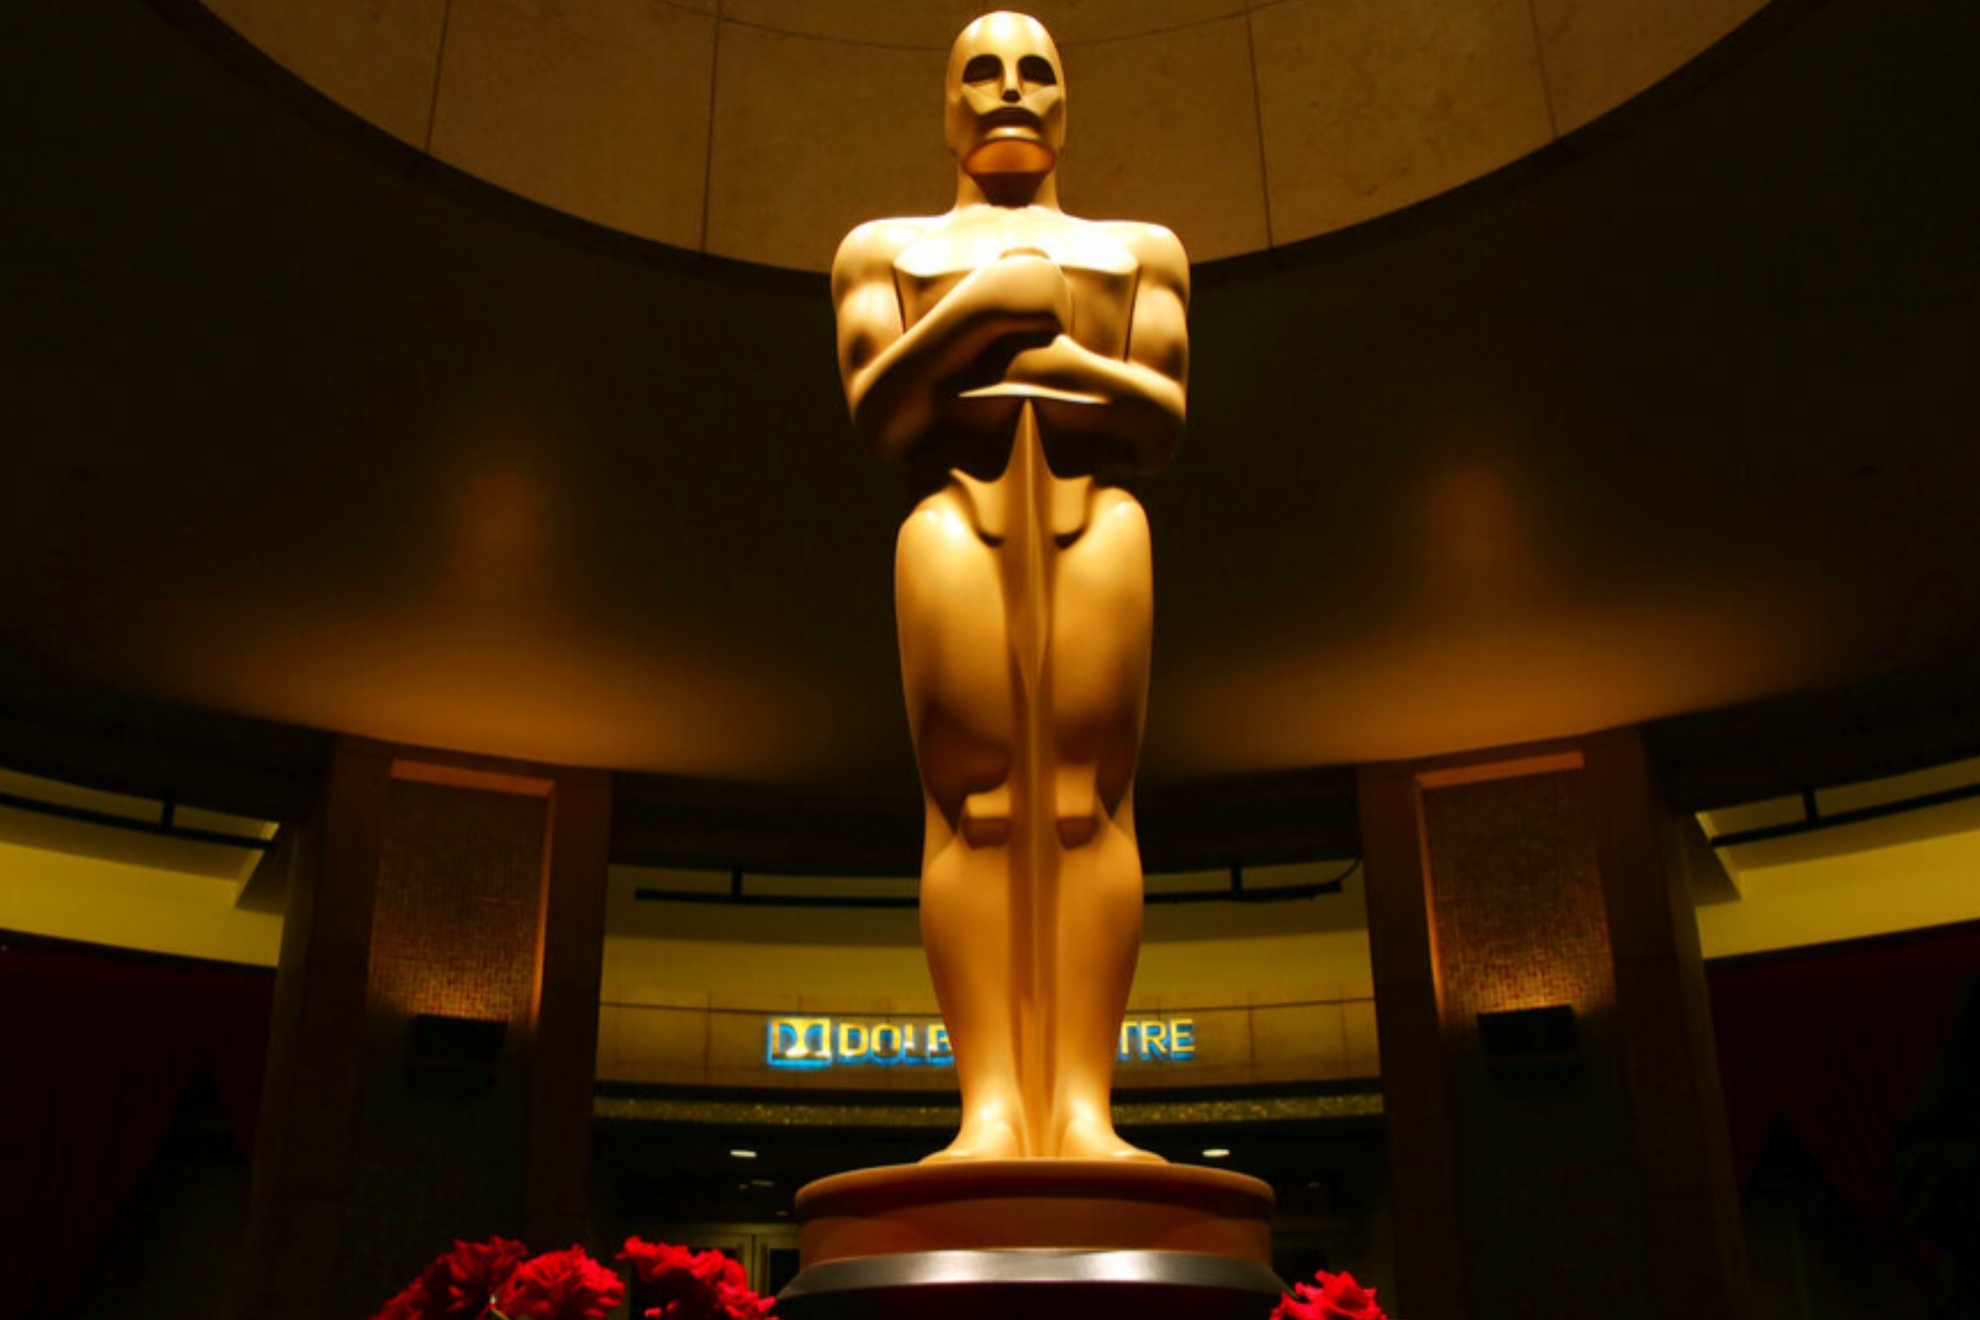 The Academy Awards trophy, Oscar is an iconic figurine known across the world